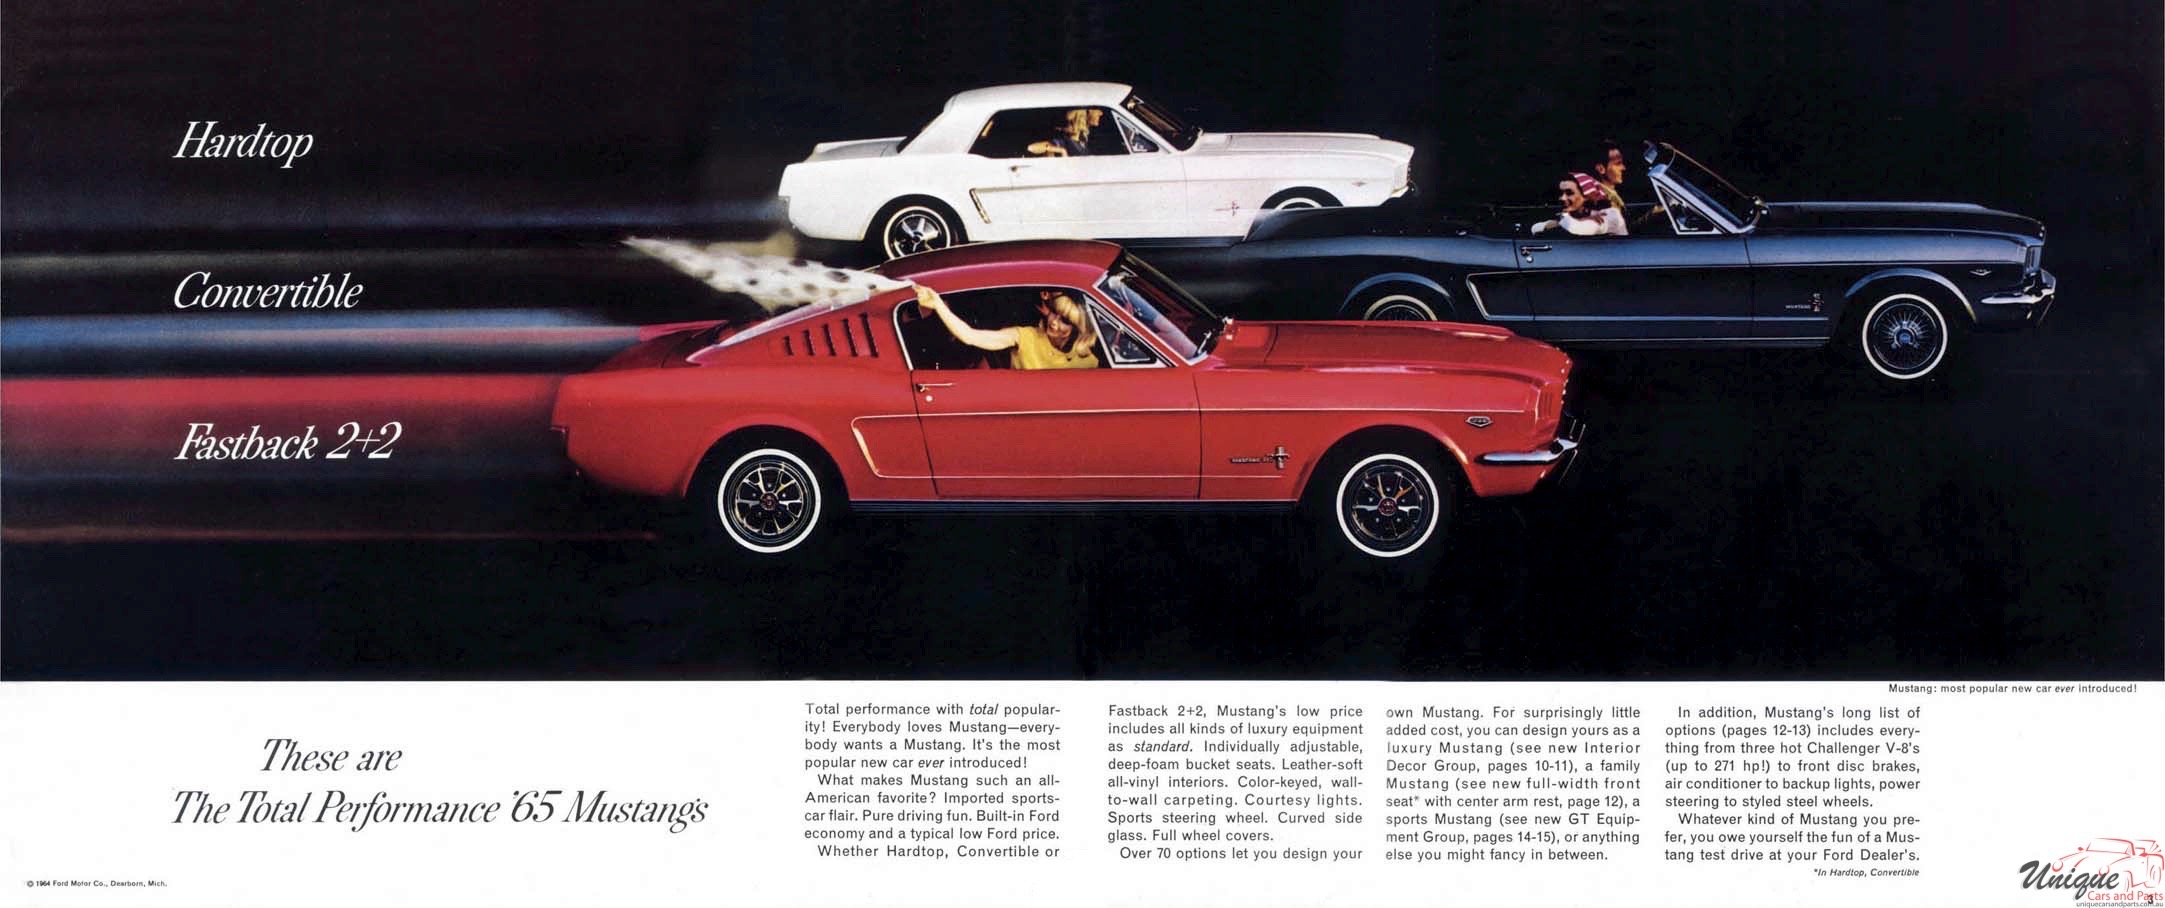 1965 Ford Mustang Brochure Page 2